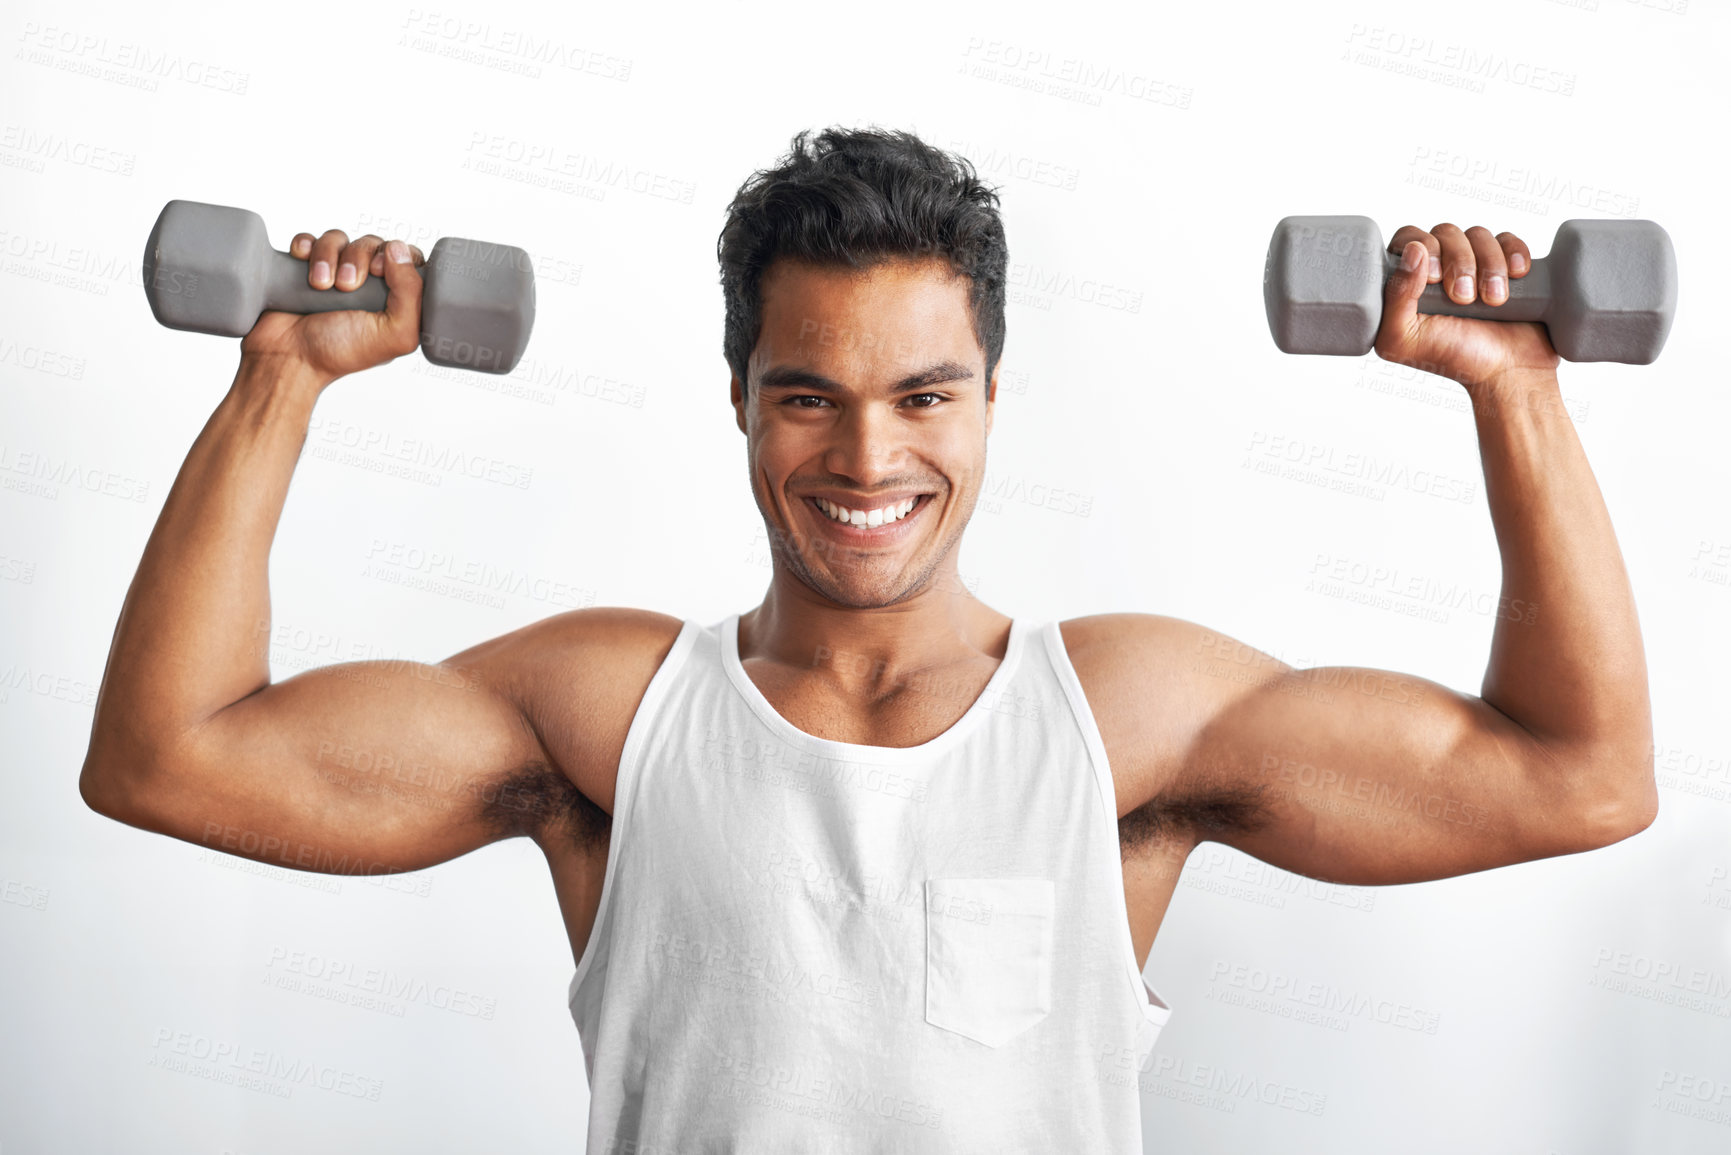 Buy stock photo Studio portrait of an athletic young man holding up dumbbells